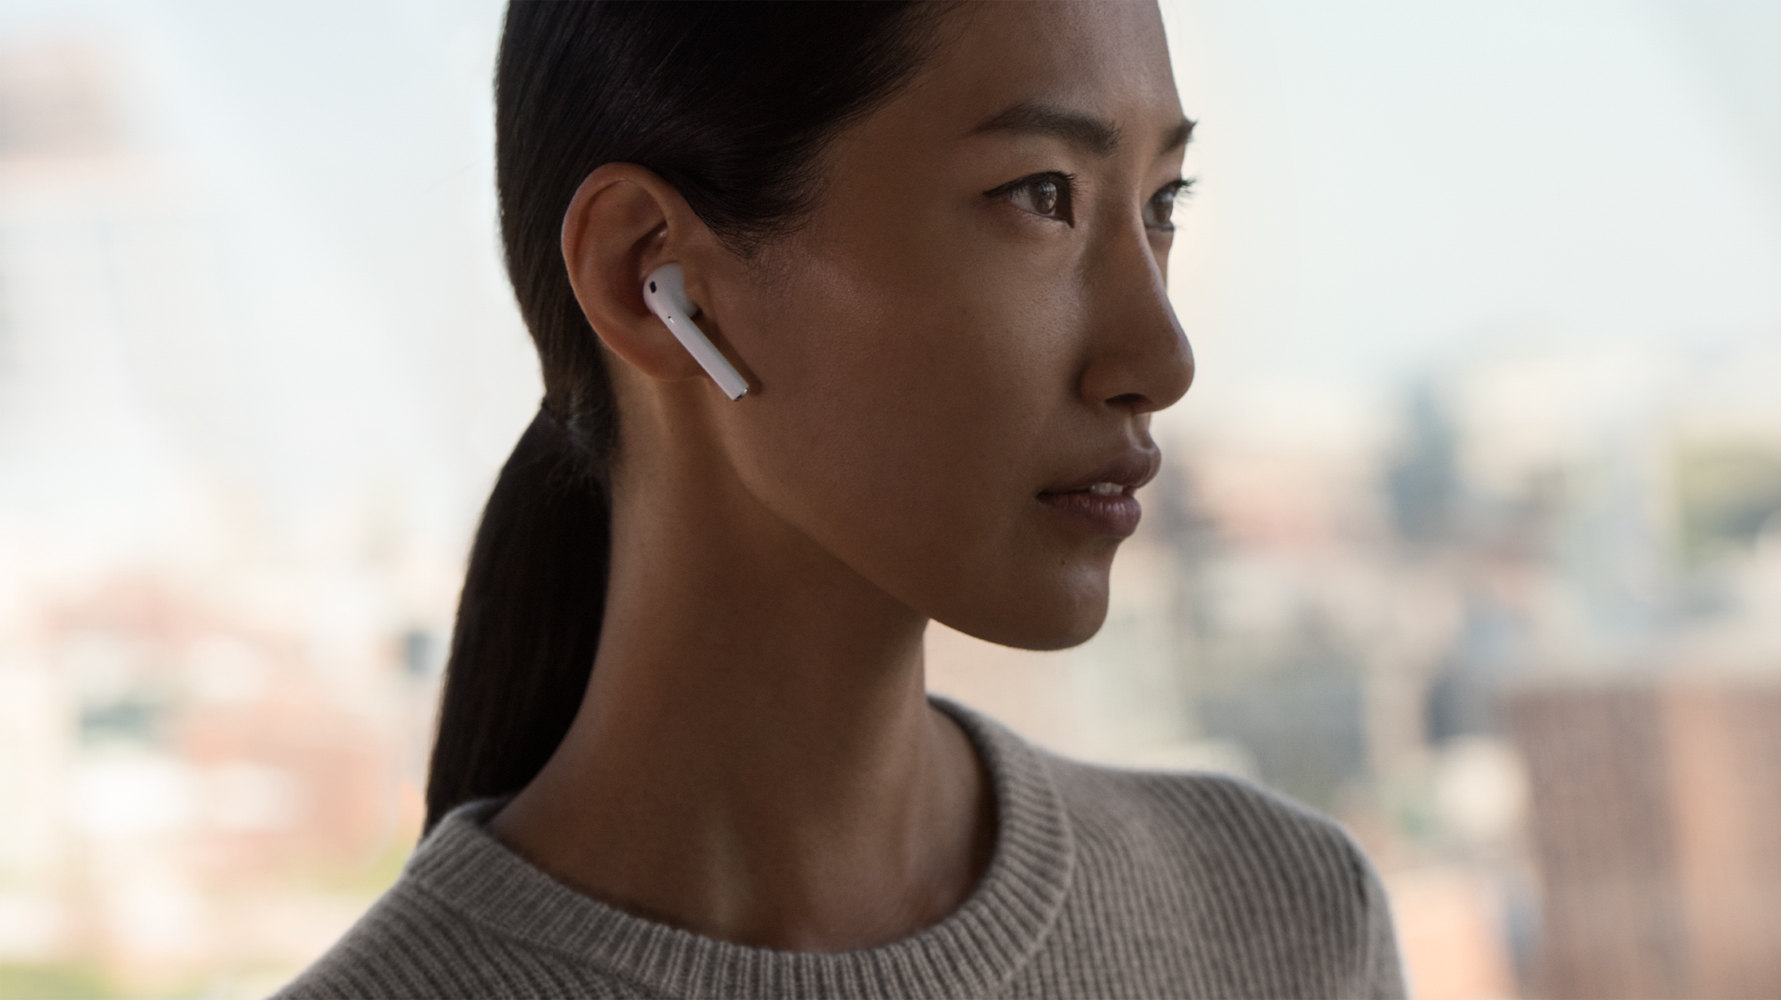 apple airpods 2 Amazon To Take On AirPods With First Alexa Wearable